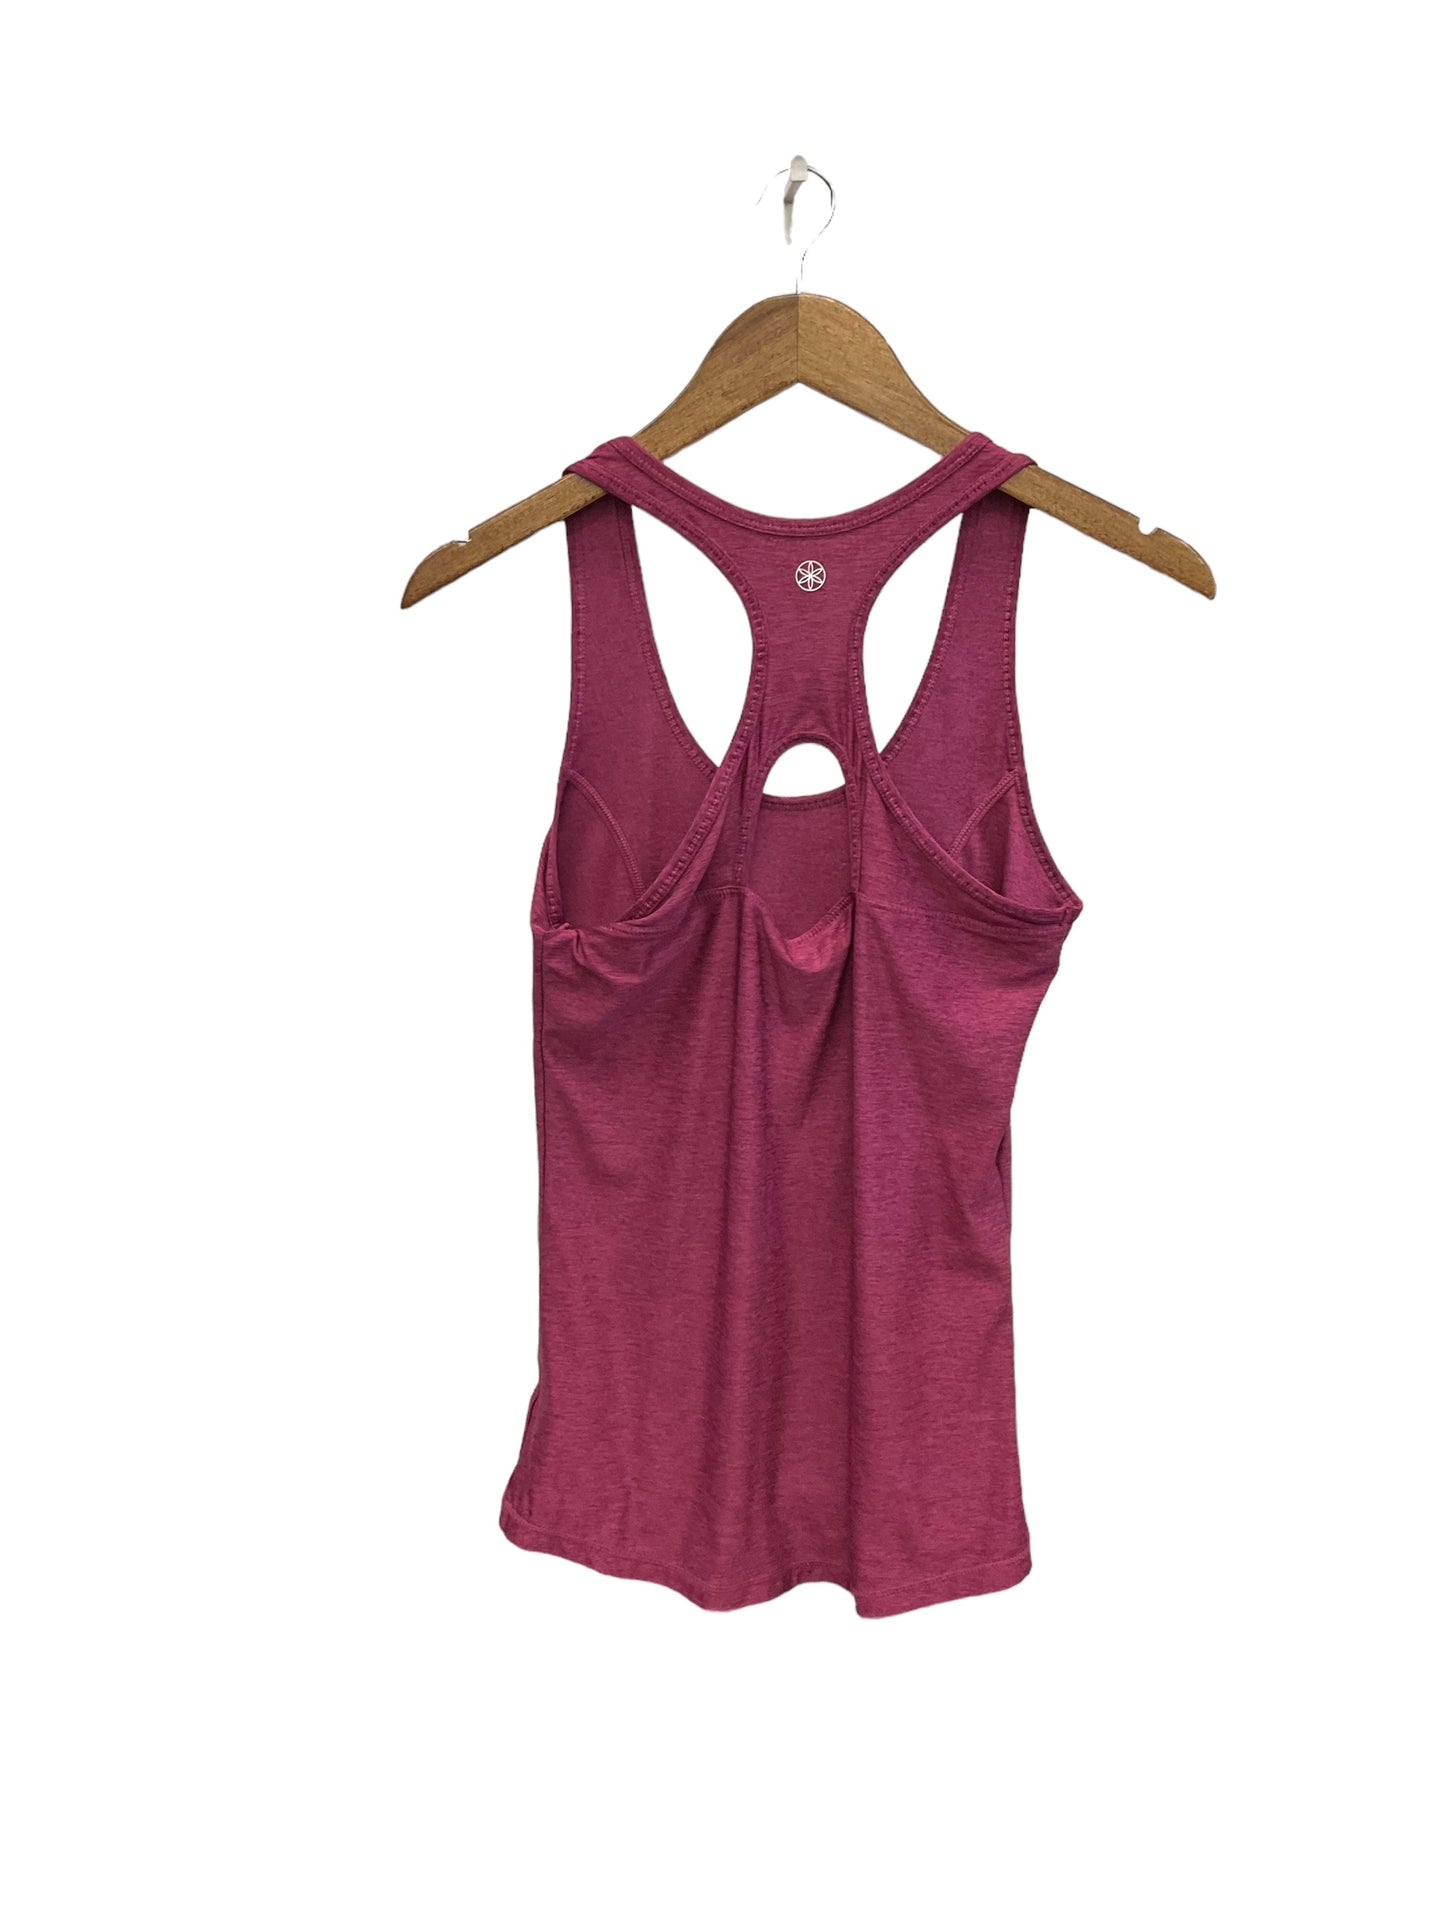 Athletic Tank Top By Gaiam  Size: Xs